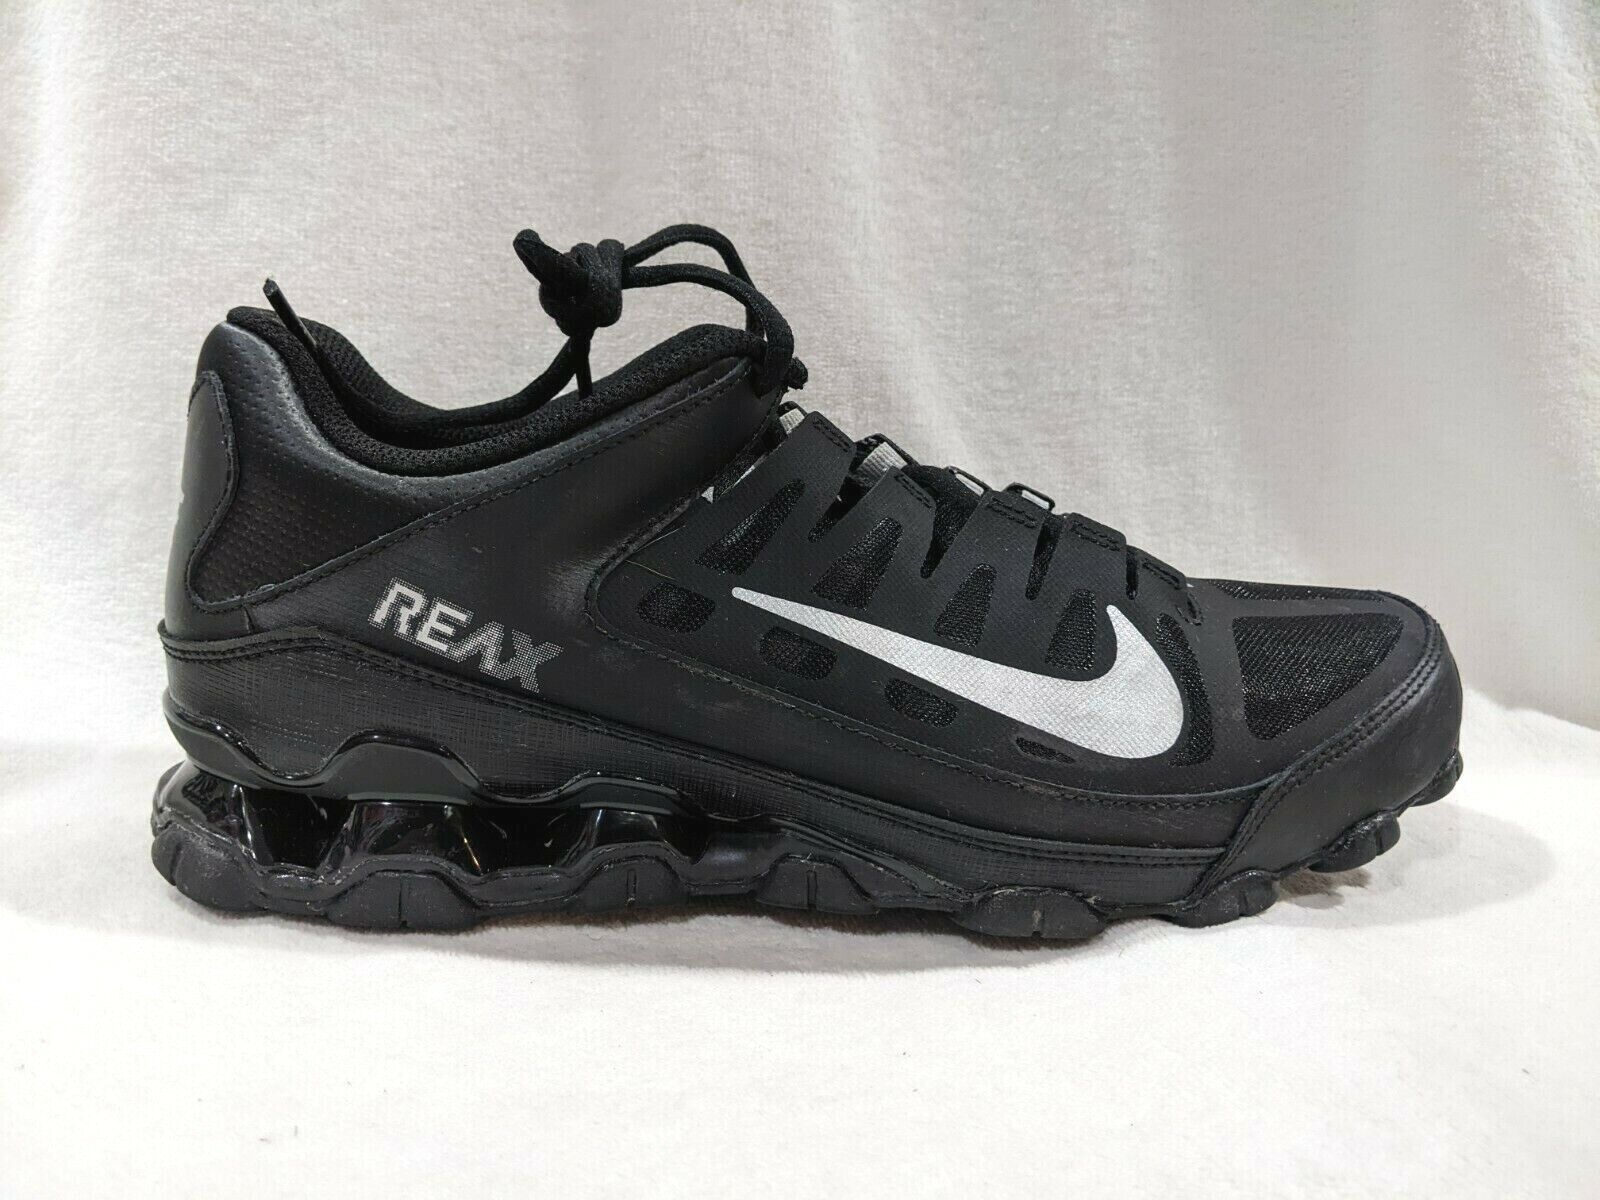 Looking for Nike Reax Shoes in Men